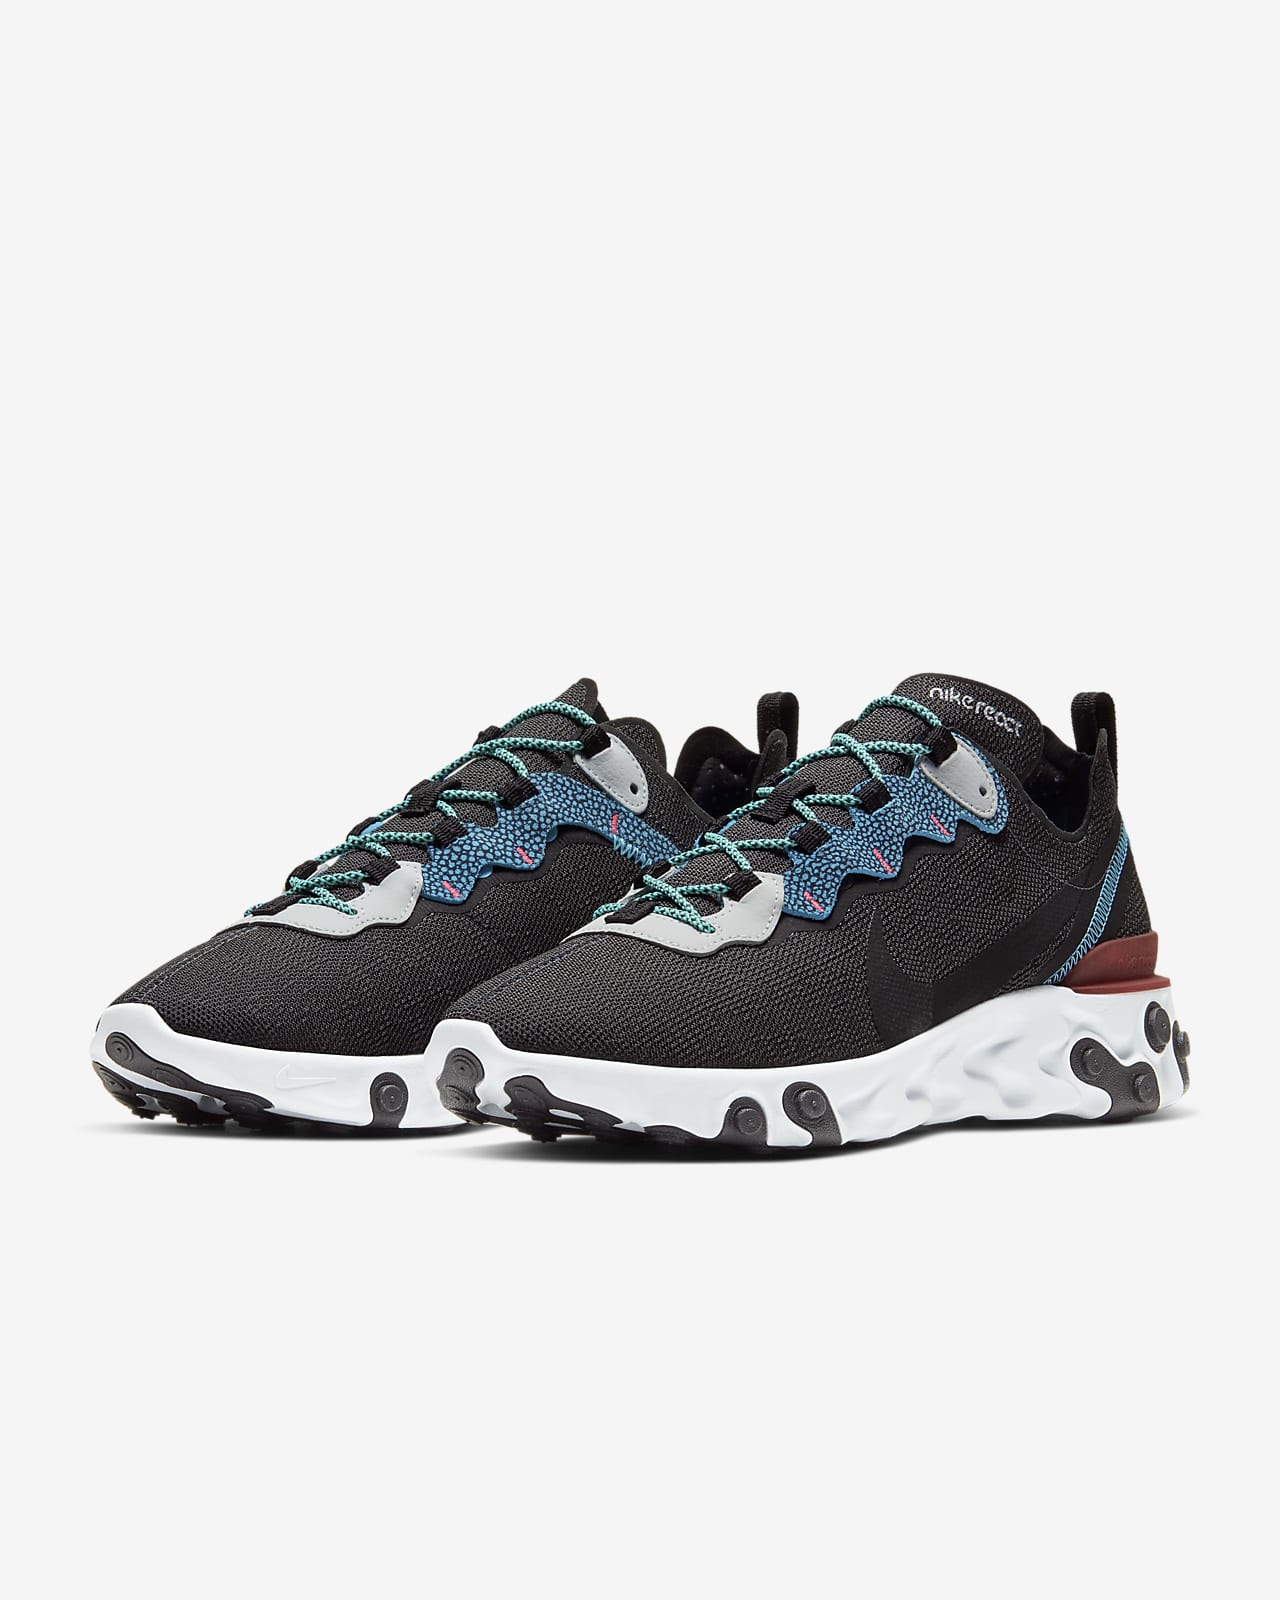 nike react element 55 trainers in black